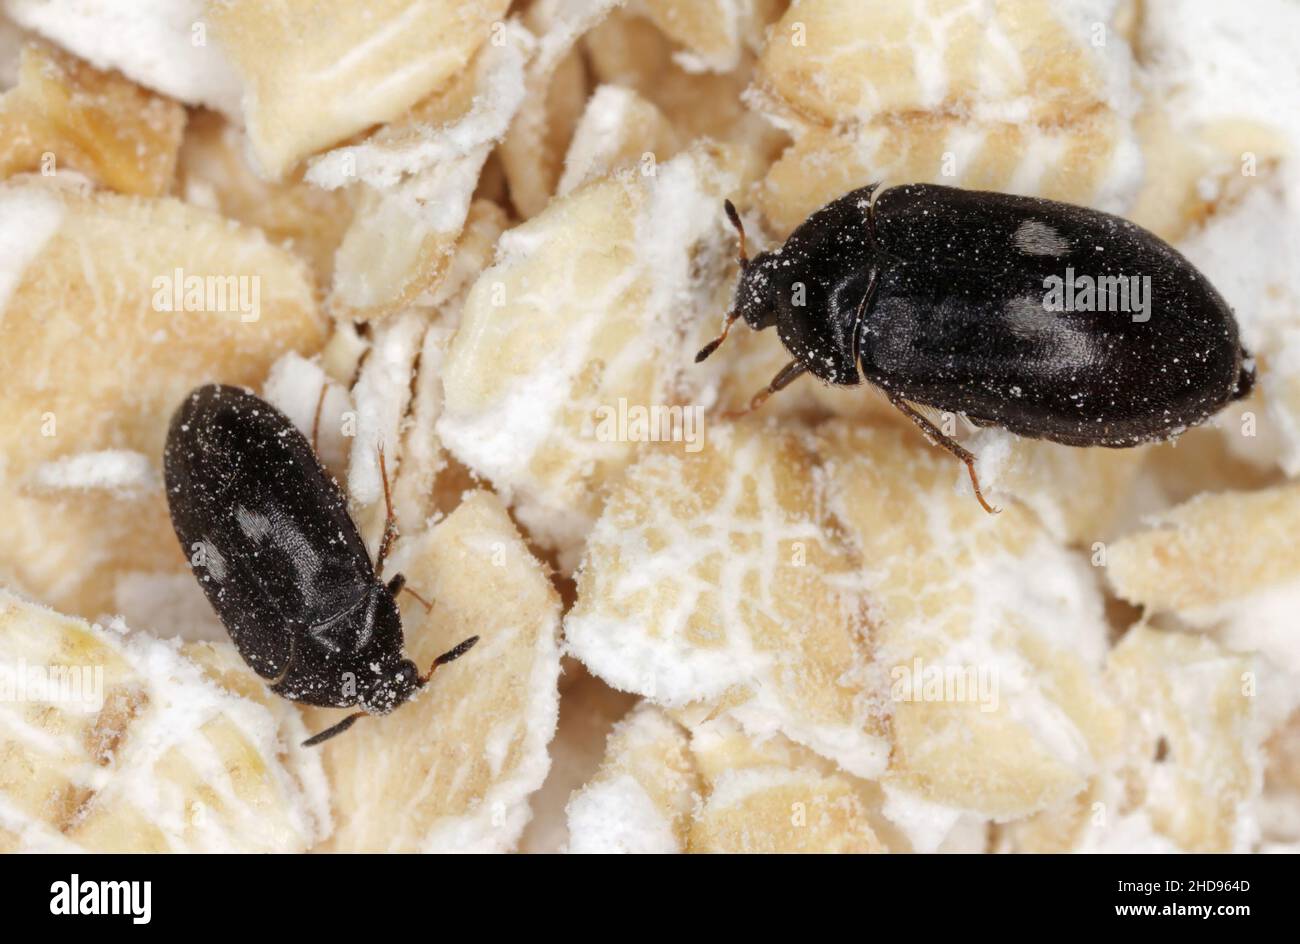 Female and male of Attagenus pellio the fur beetle or carpet beetle from the family Dermestidae a skin beetles On oat flakes. Stock Photo